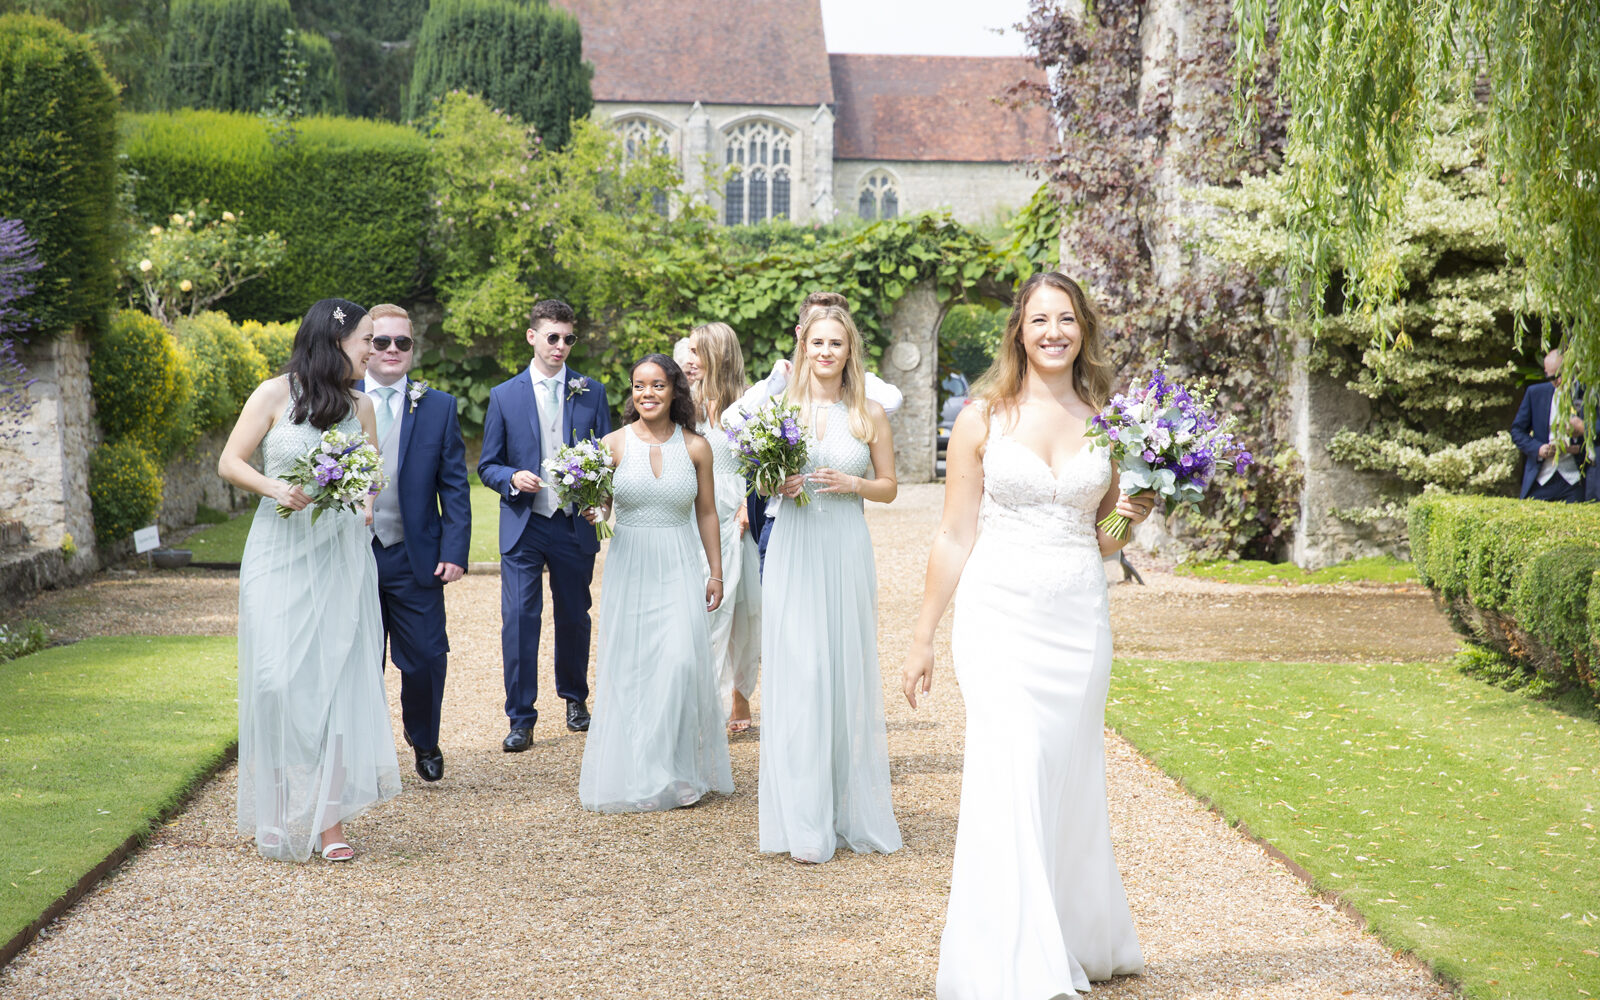 bride with bridal party walking around the grounds at Nettlestead Park in Maidstone. Captured by Kent wedding photographer, Victoria Green.